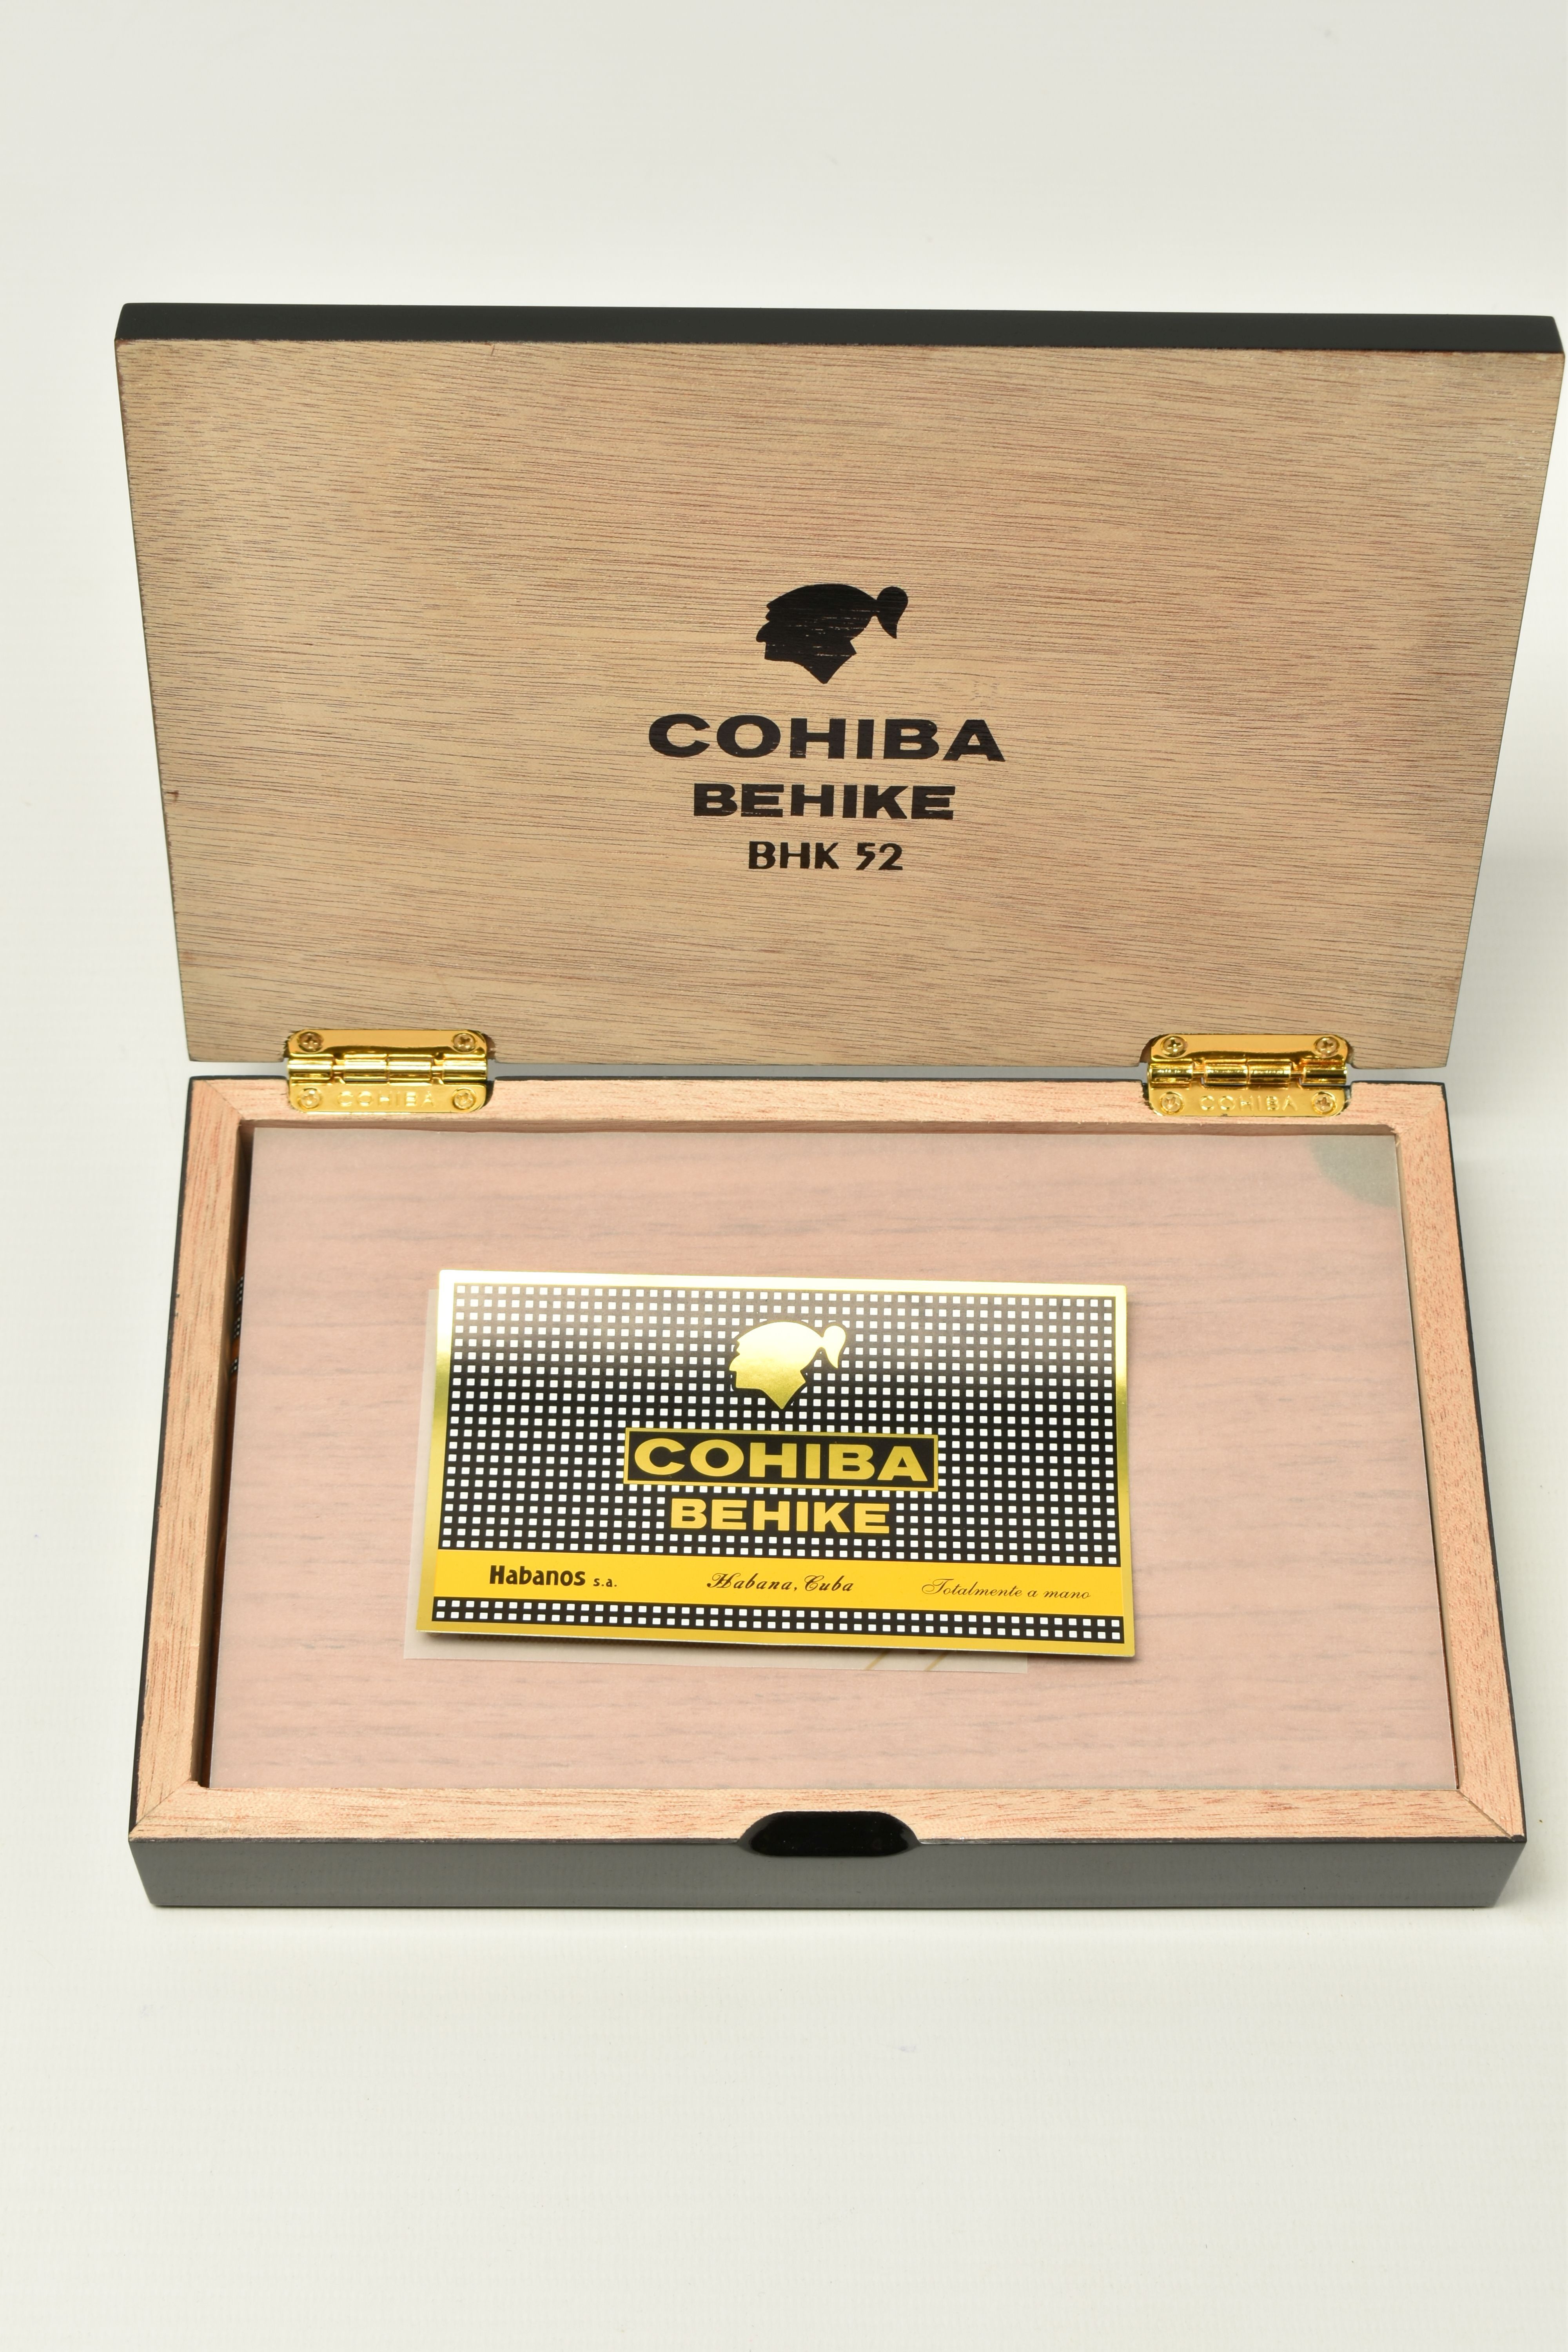 CIGARS, One Box of 10 COHIBA BEHIKE BHK 52 Cigars, outer box seal (broken) has a barcode, inner - Image 6 of 7